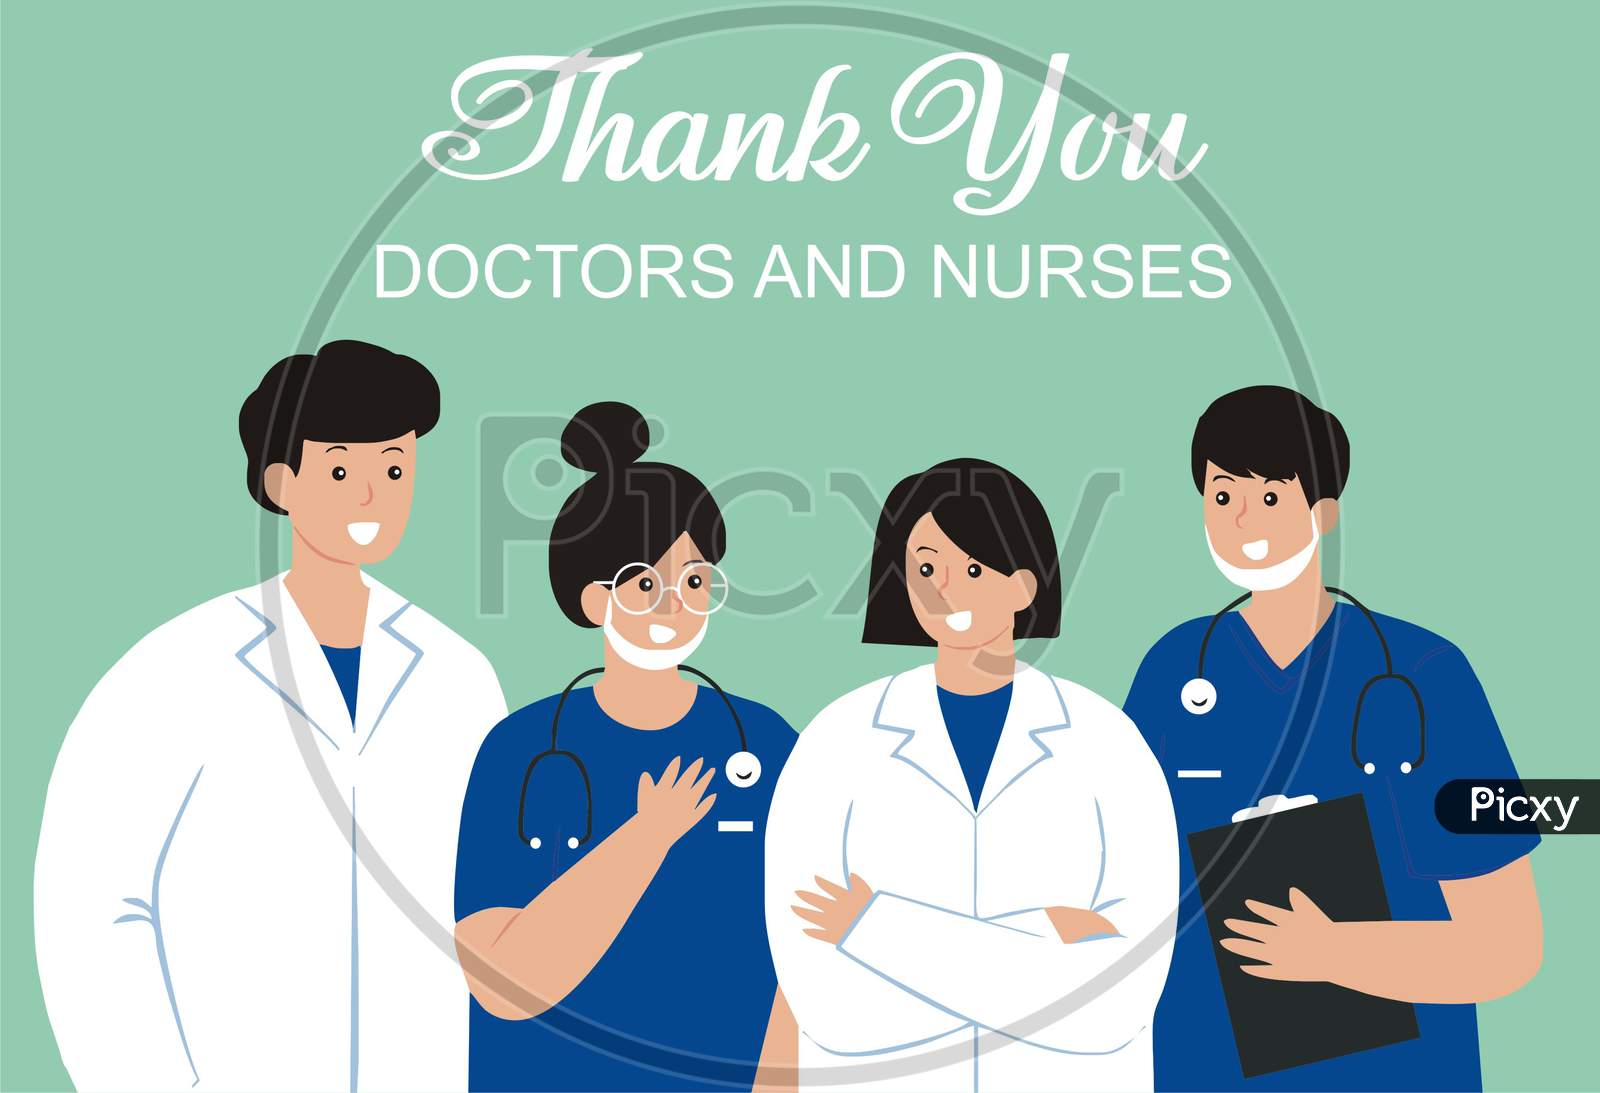 Thank you doctors and nurses